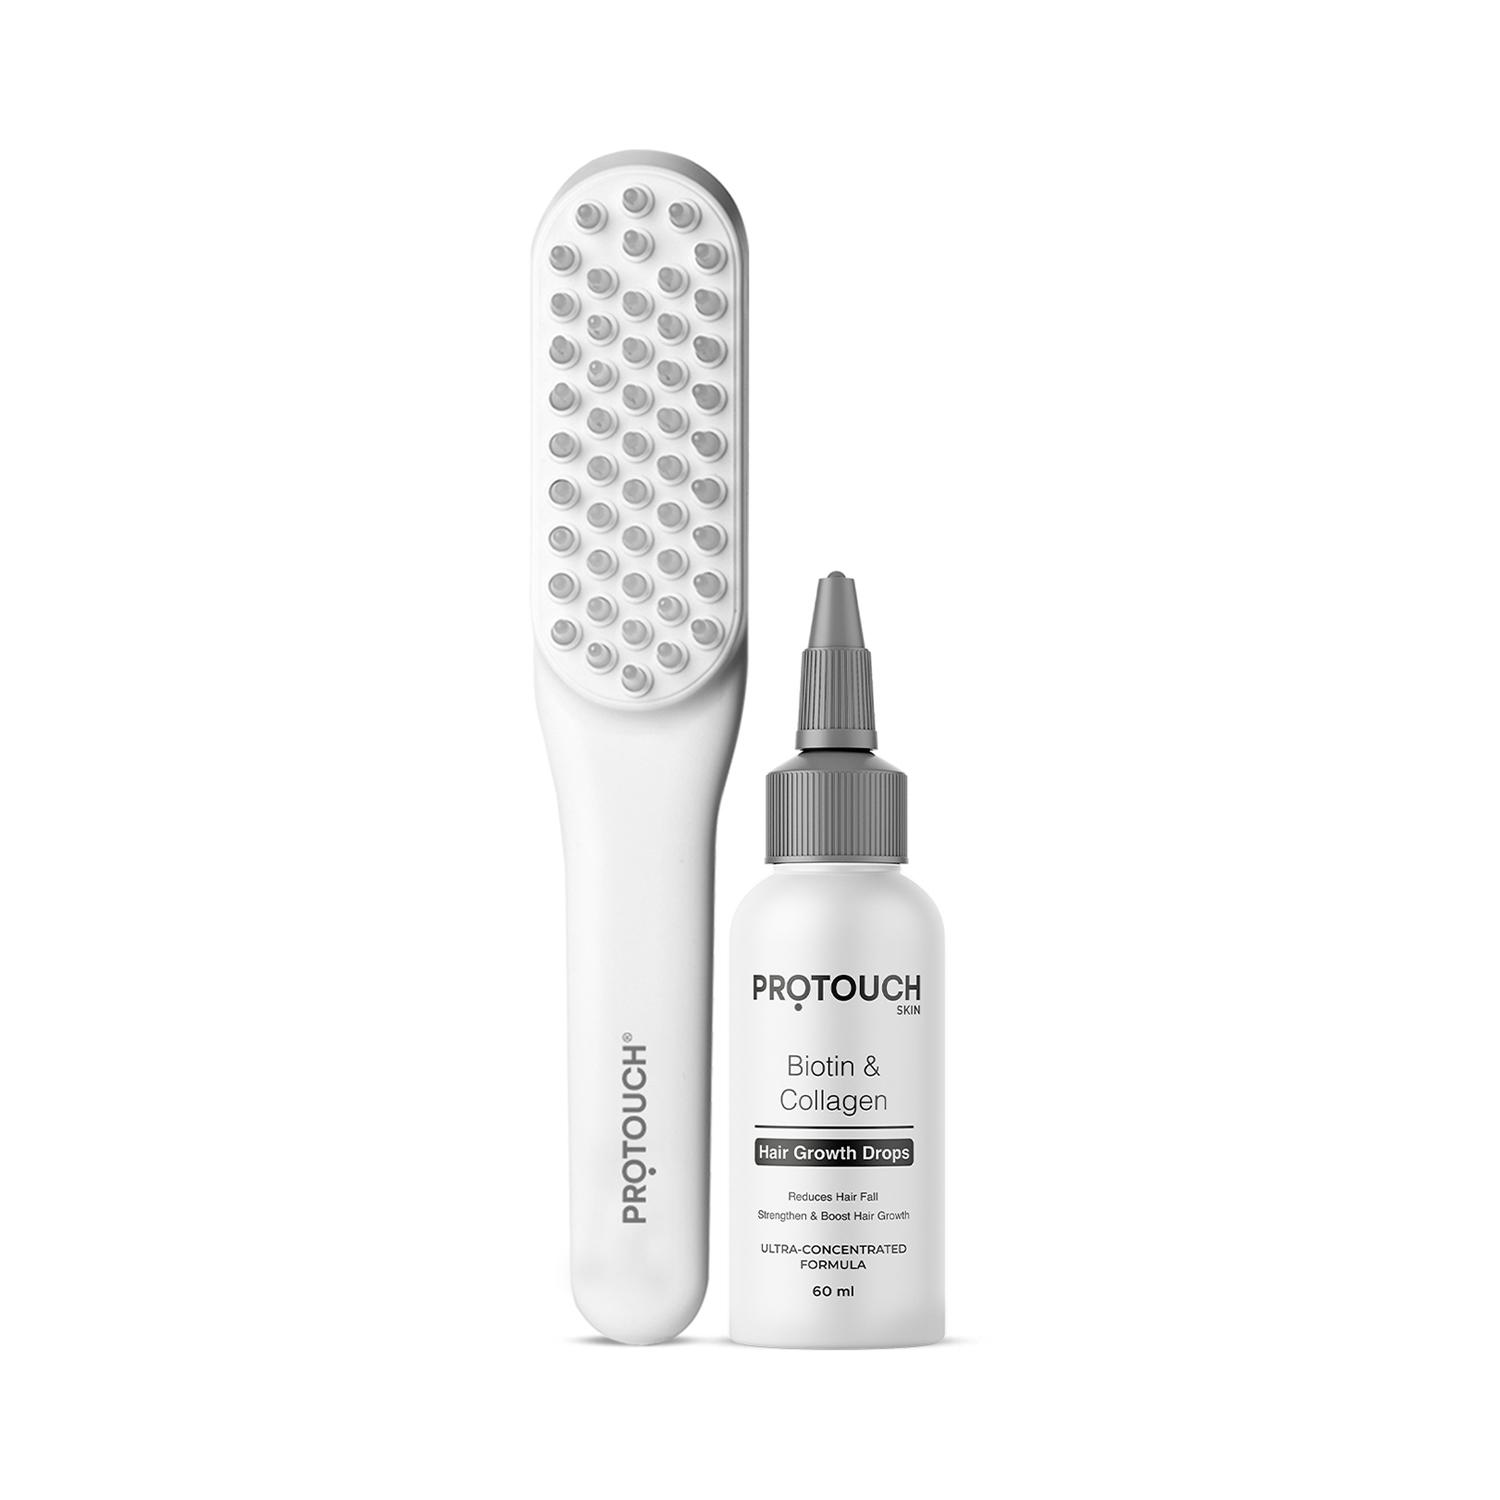 Protouch Complete Hair Growth Combo